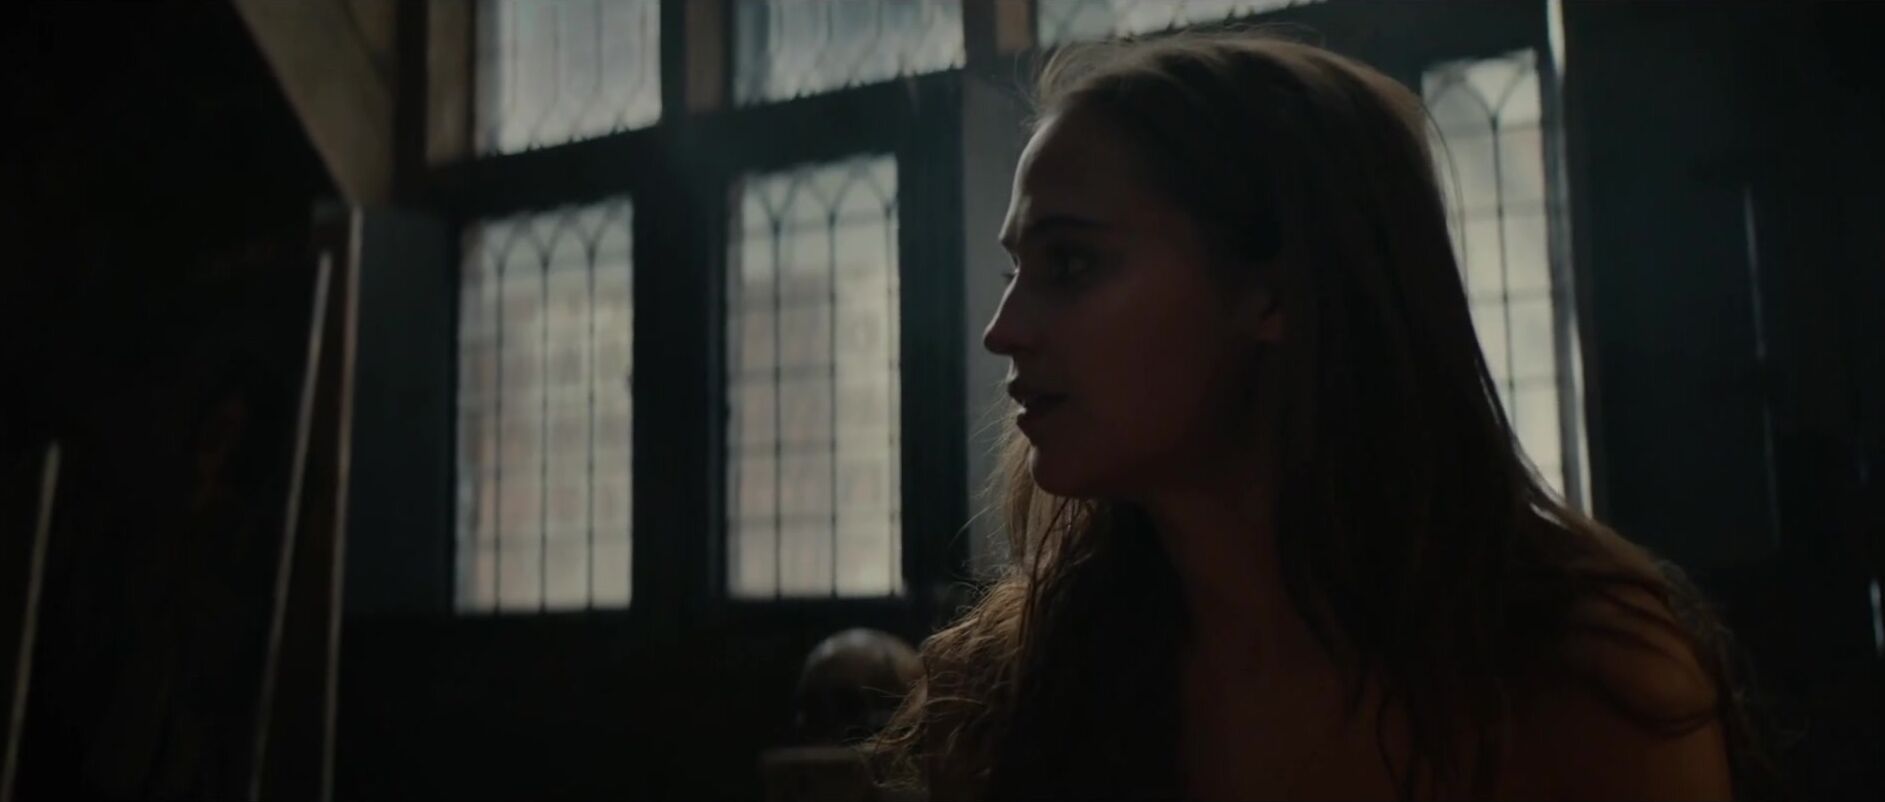 Hot Chicks Fucking Hot sex scenes of Alicia Vikander and other actresses being penetrated in Tulip Fever Jerk